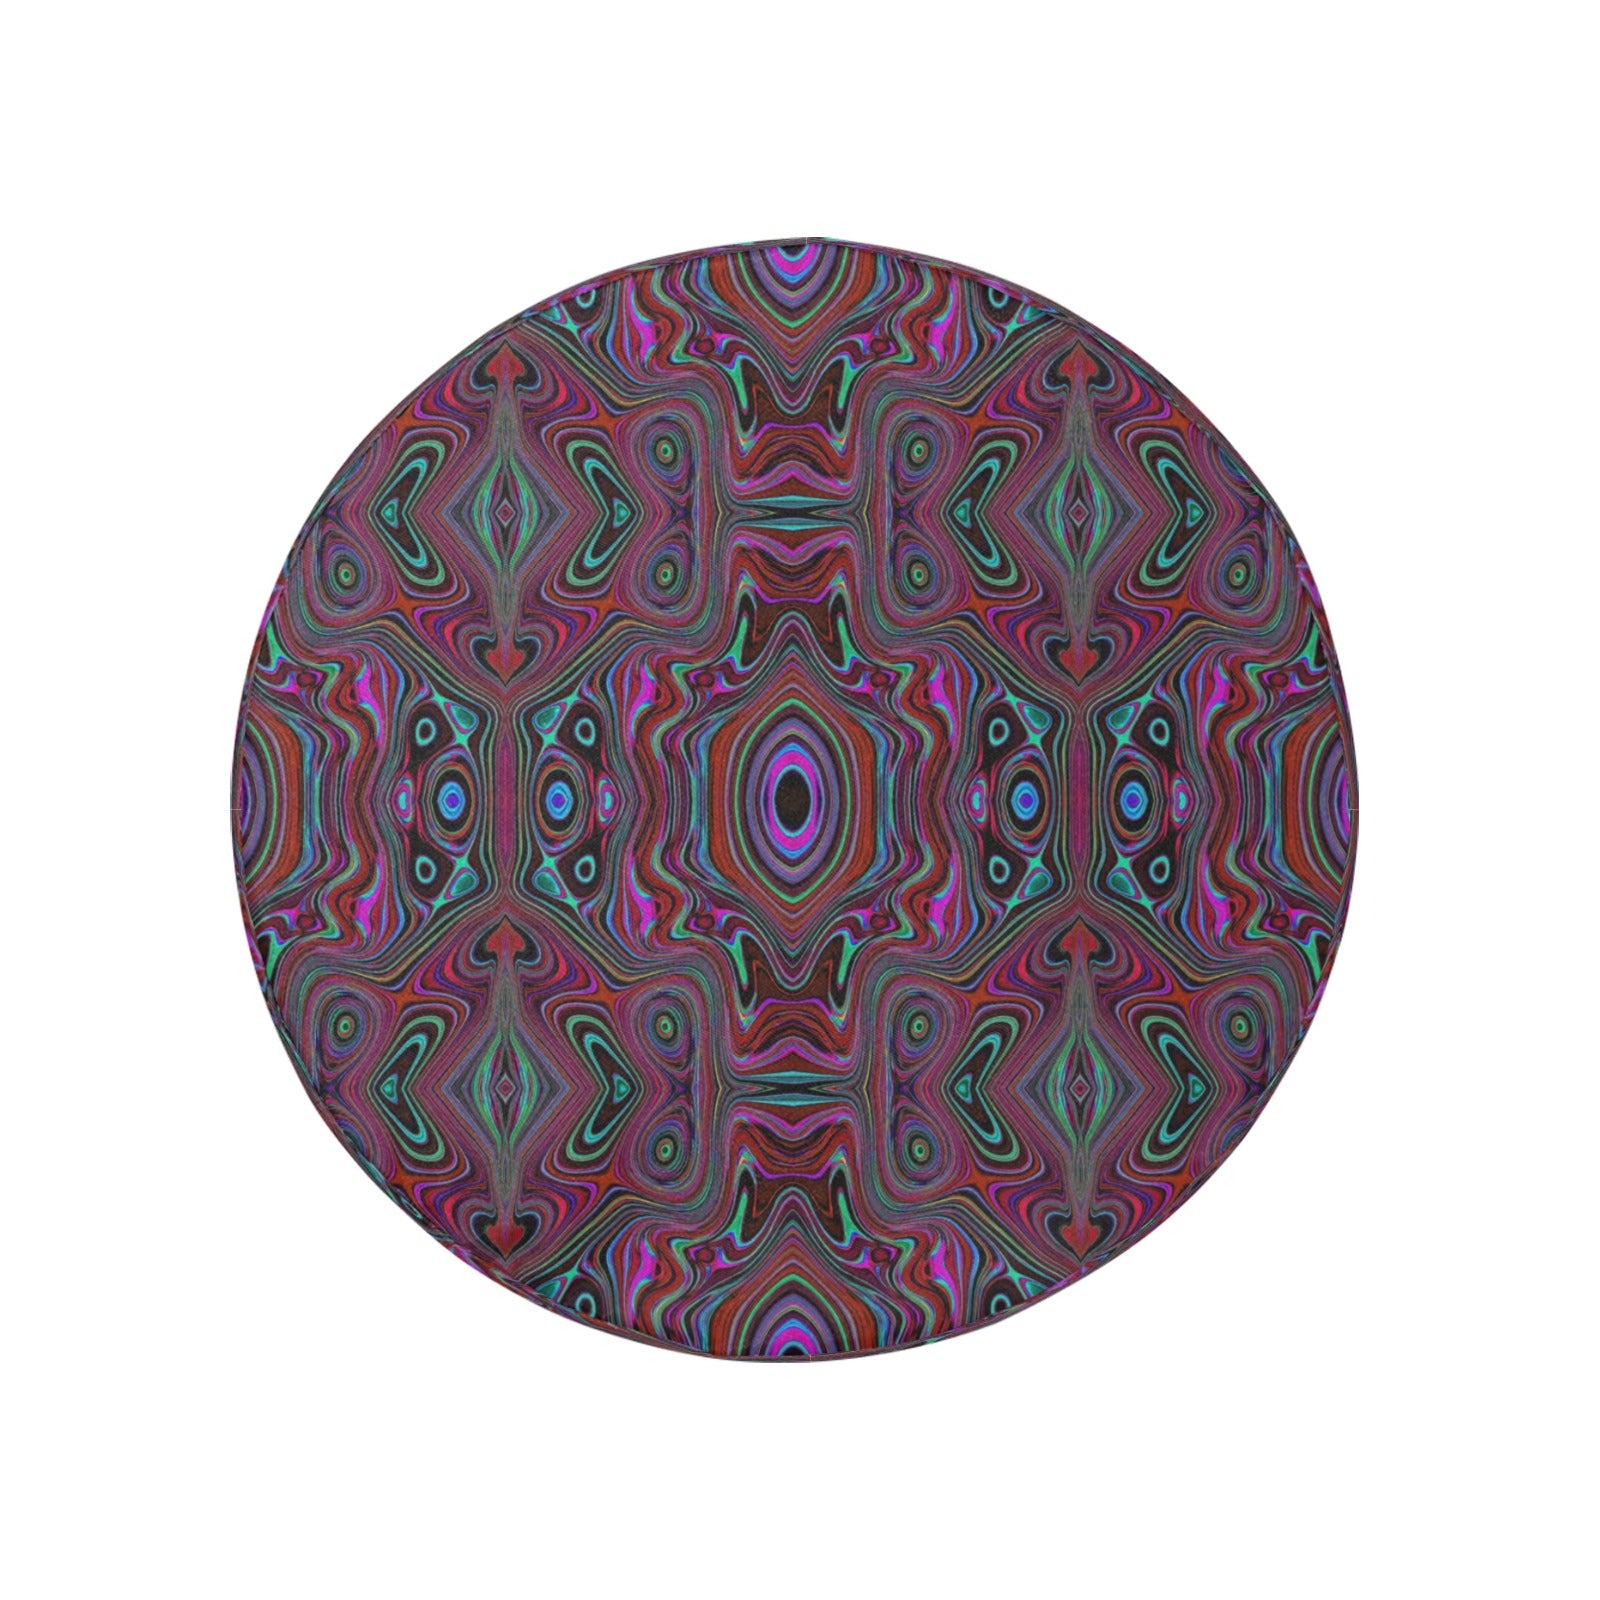 Spare Tire Covers, Trippy Seafoam Green and Magenta Abstract Pattern - Medium